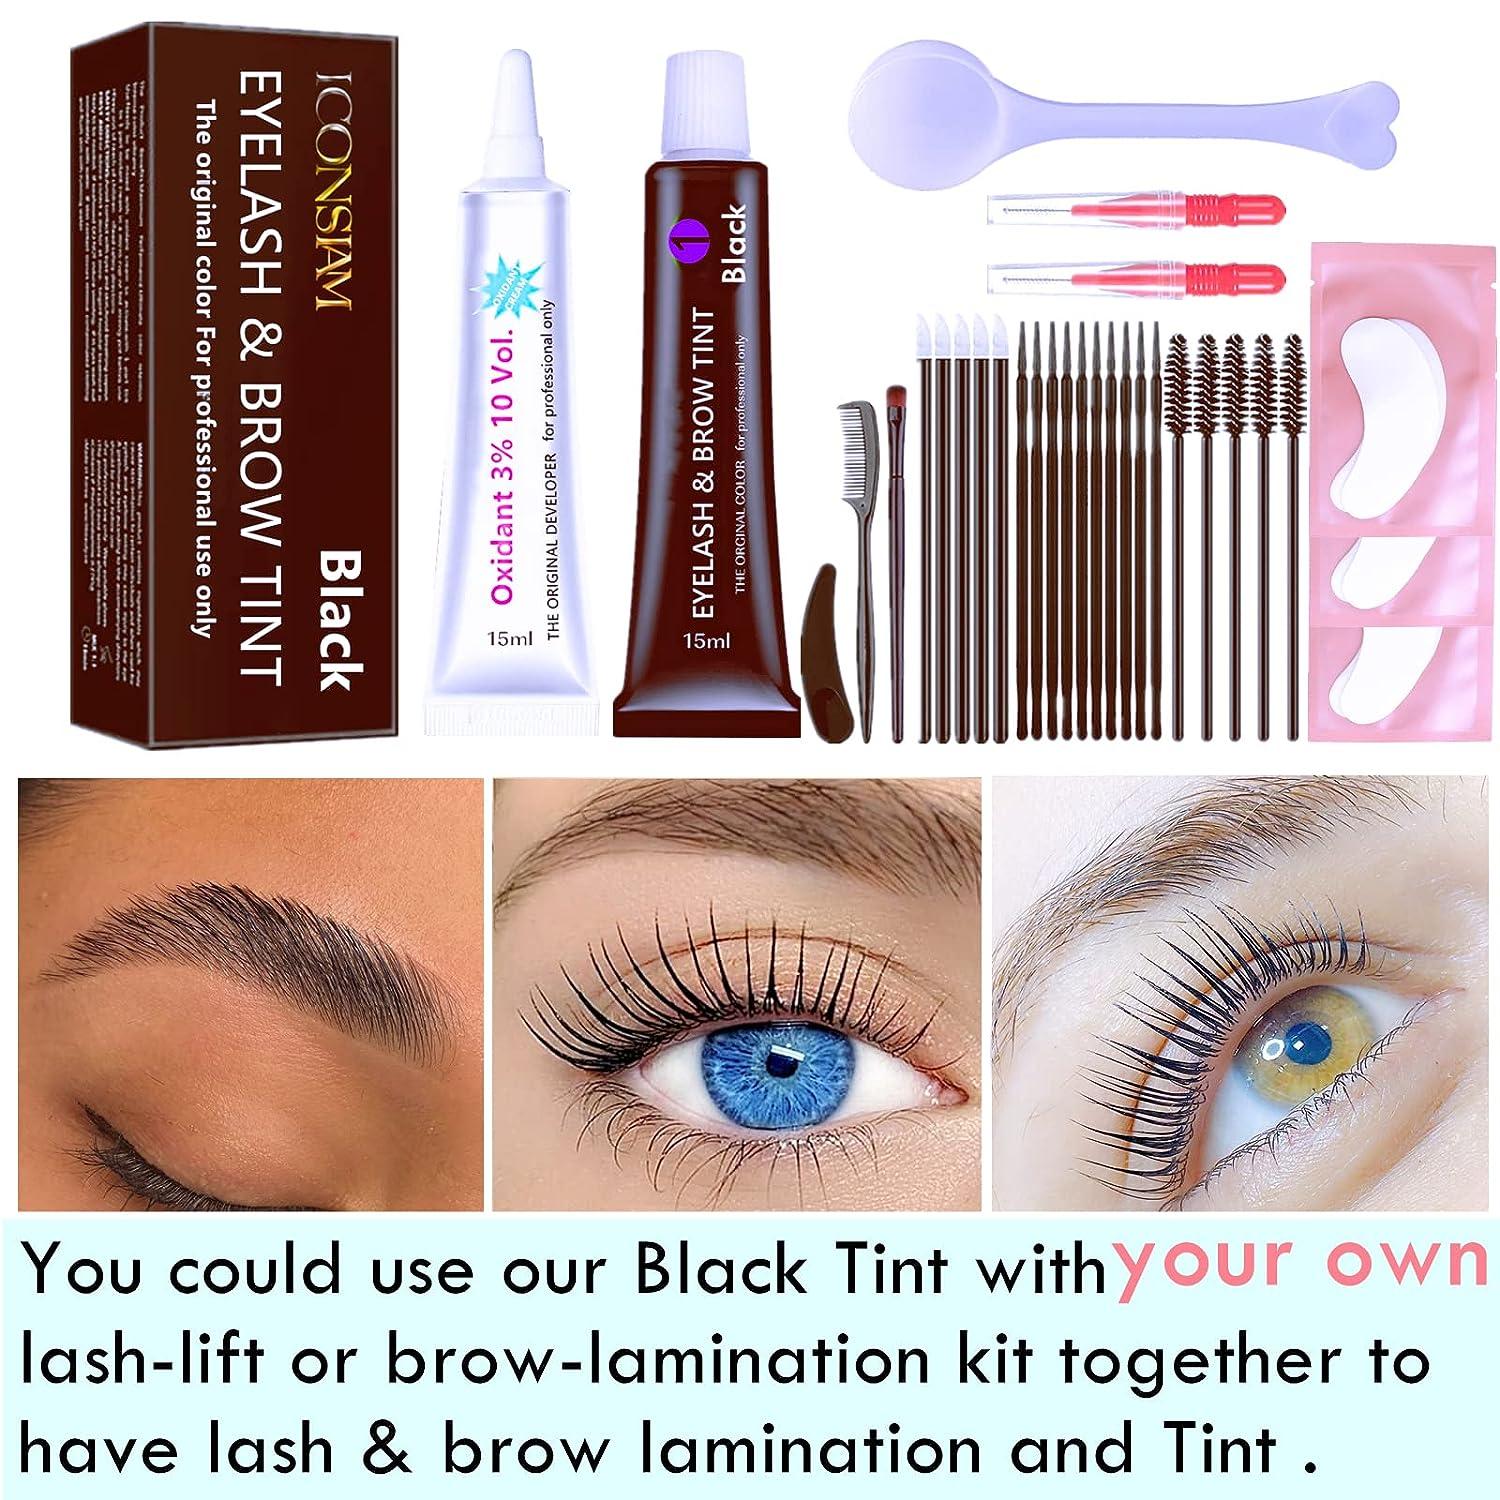 Brow and Lash Dye Kit: all in one, Buy now